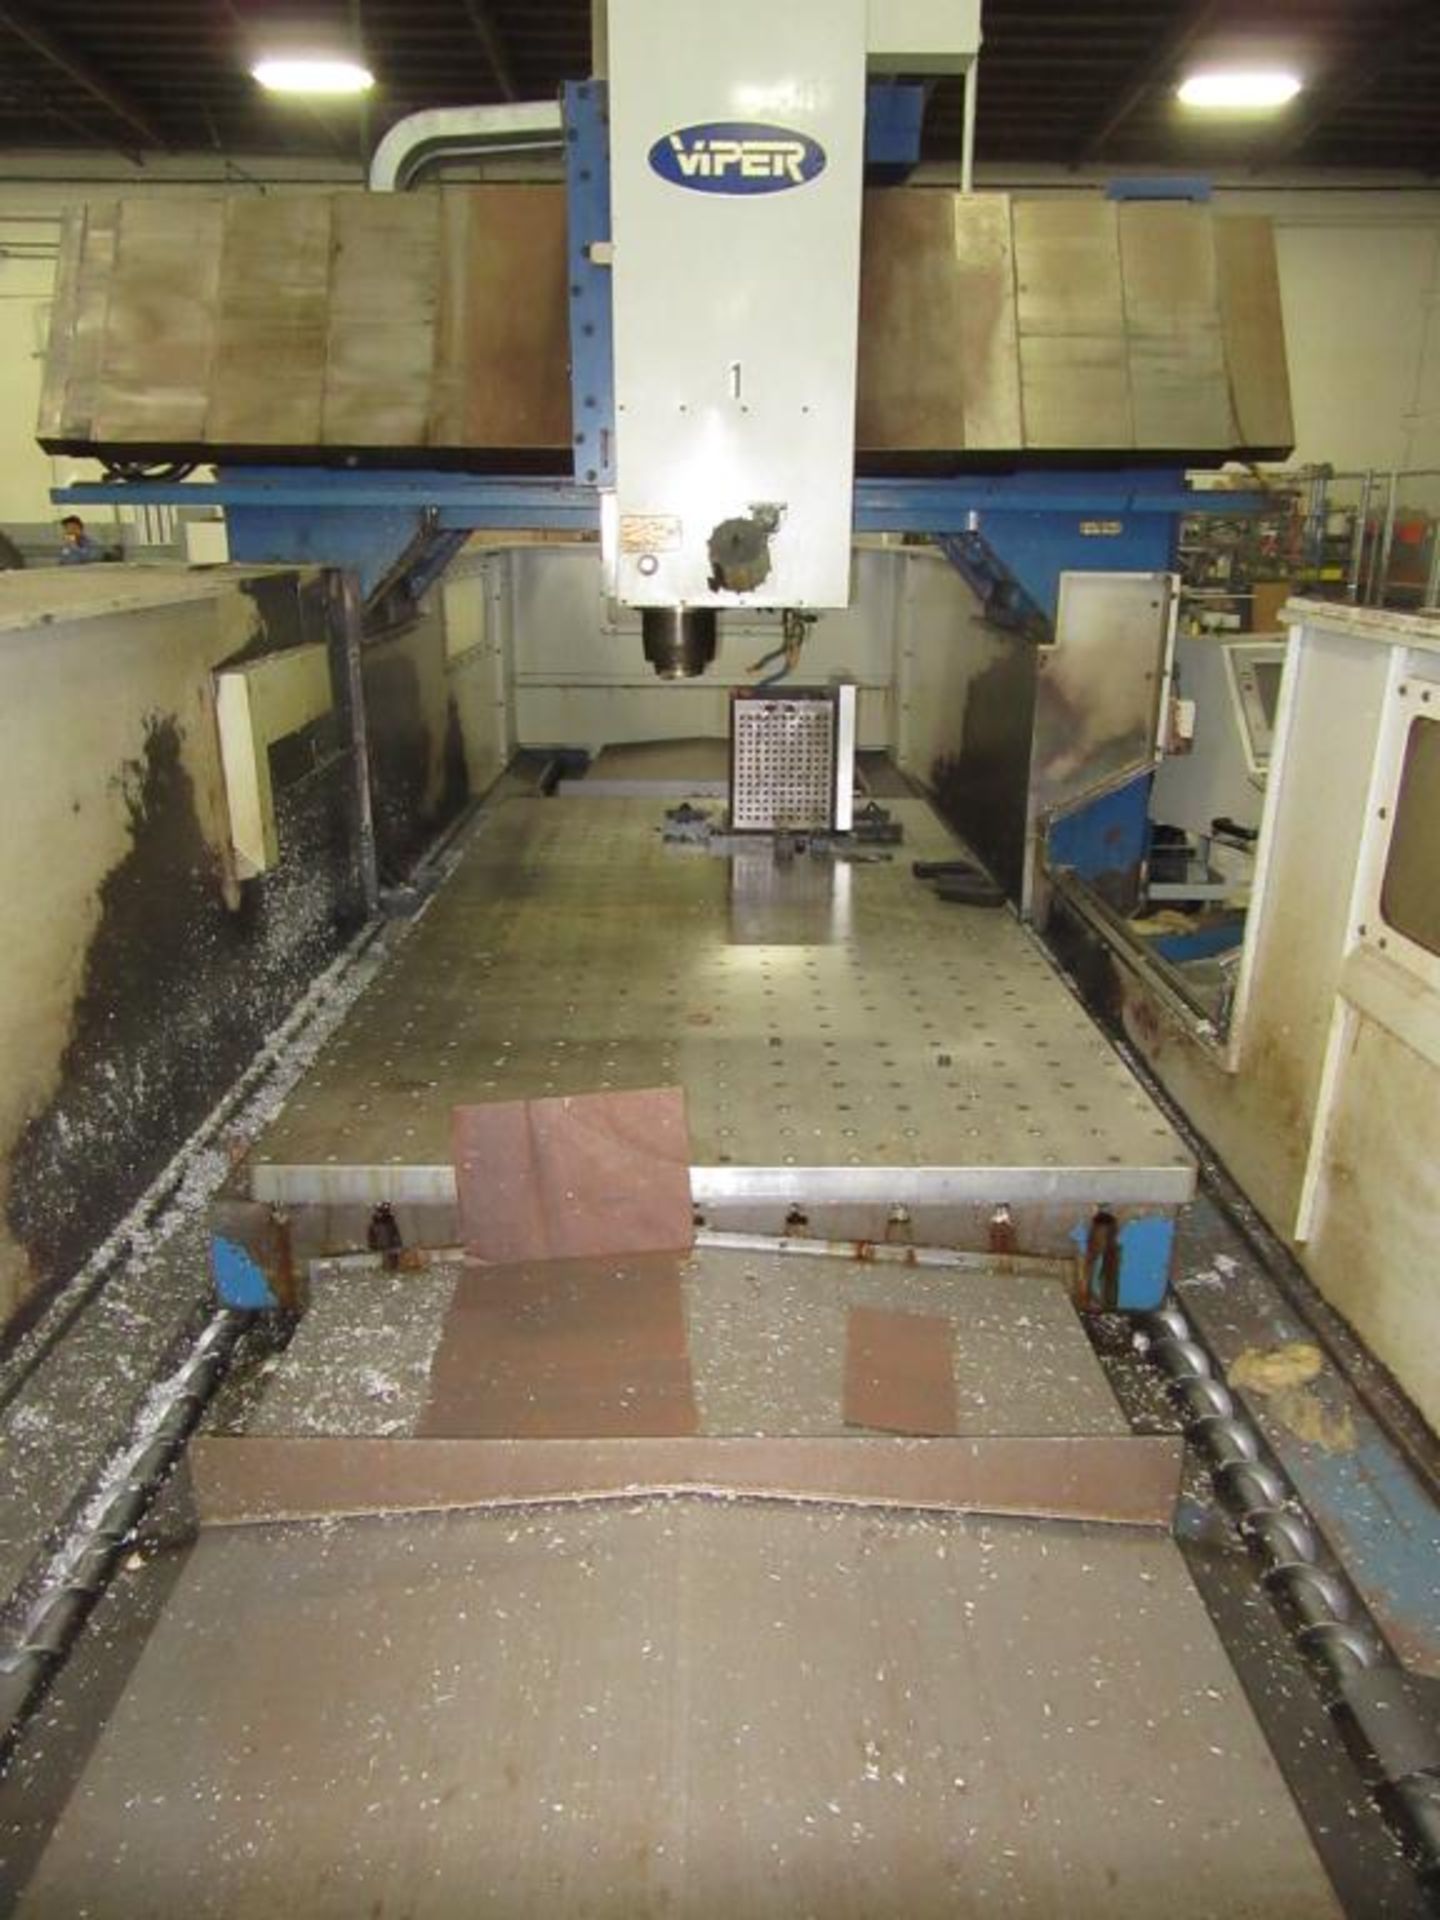 Viper HB-130W. 1997 - CNC Vertical Bridge Mill with Mitsubishi 3-Axis Control Panel, Table Size - Image 12 of 22